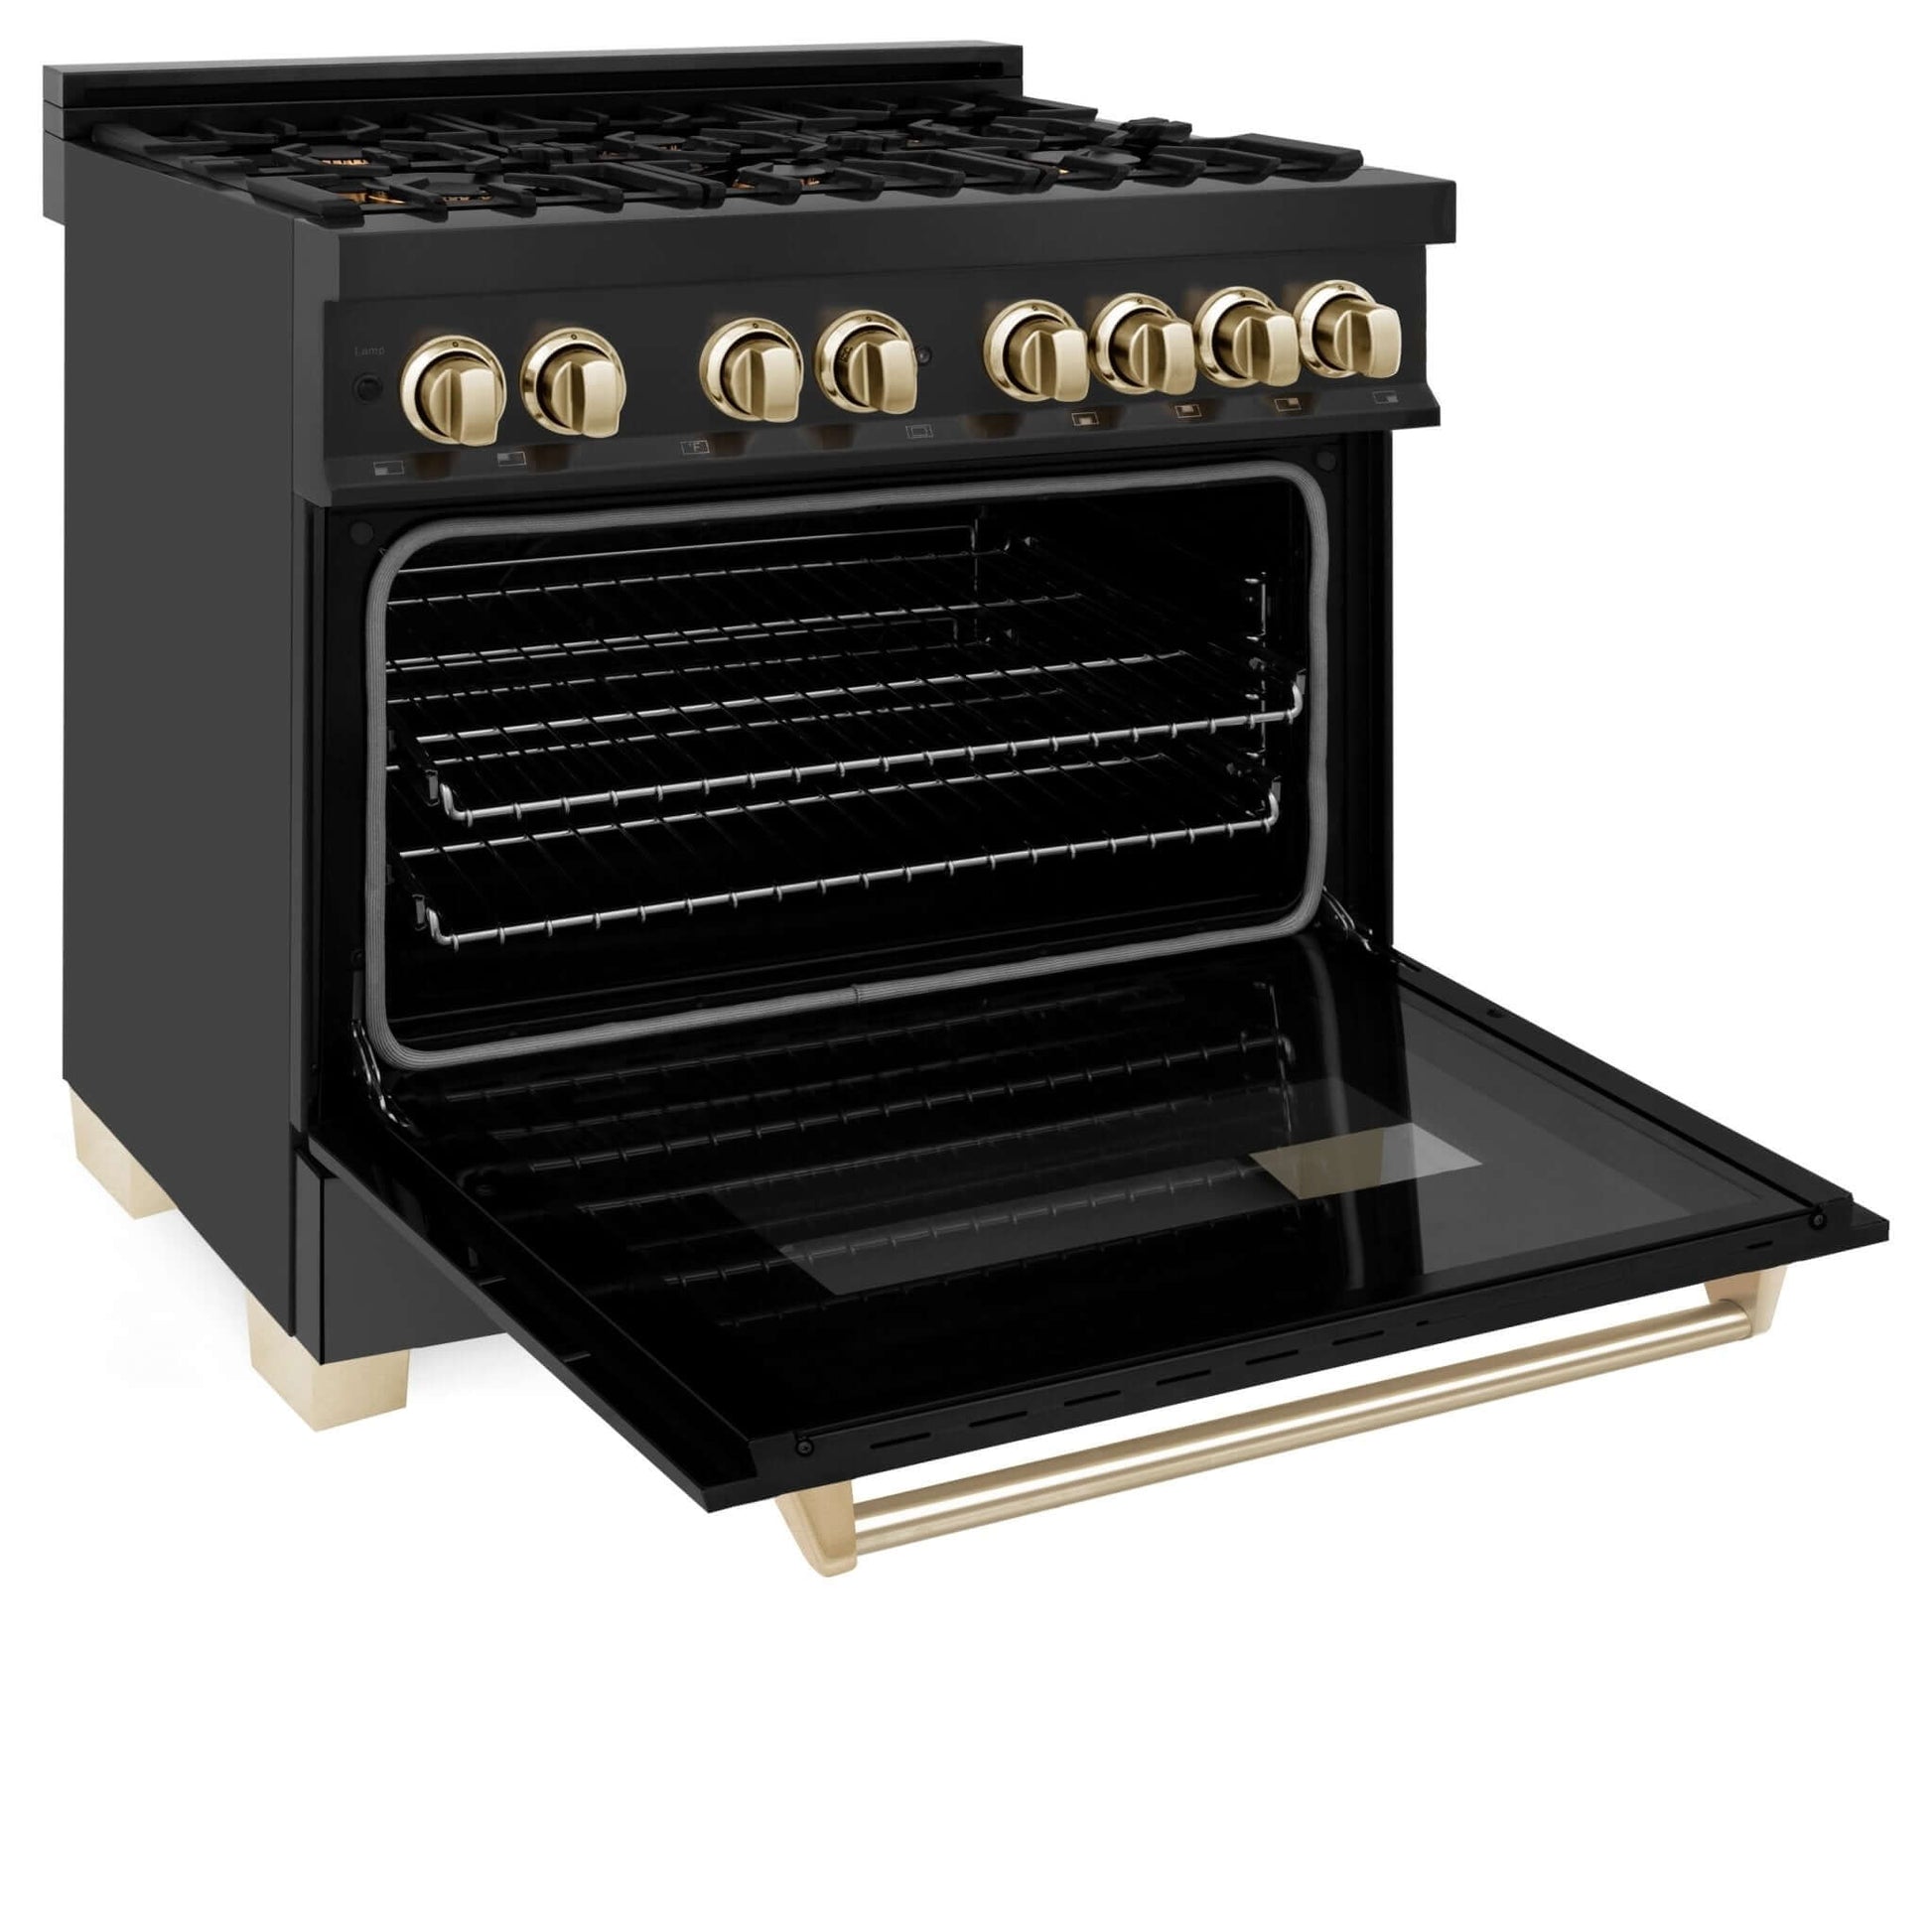 ZLINE Autograph Edition 36" Dual Fuel Range with Gas Stove and Electric Oven - Black Stainless Steel with Accents